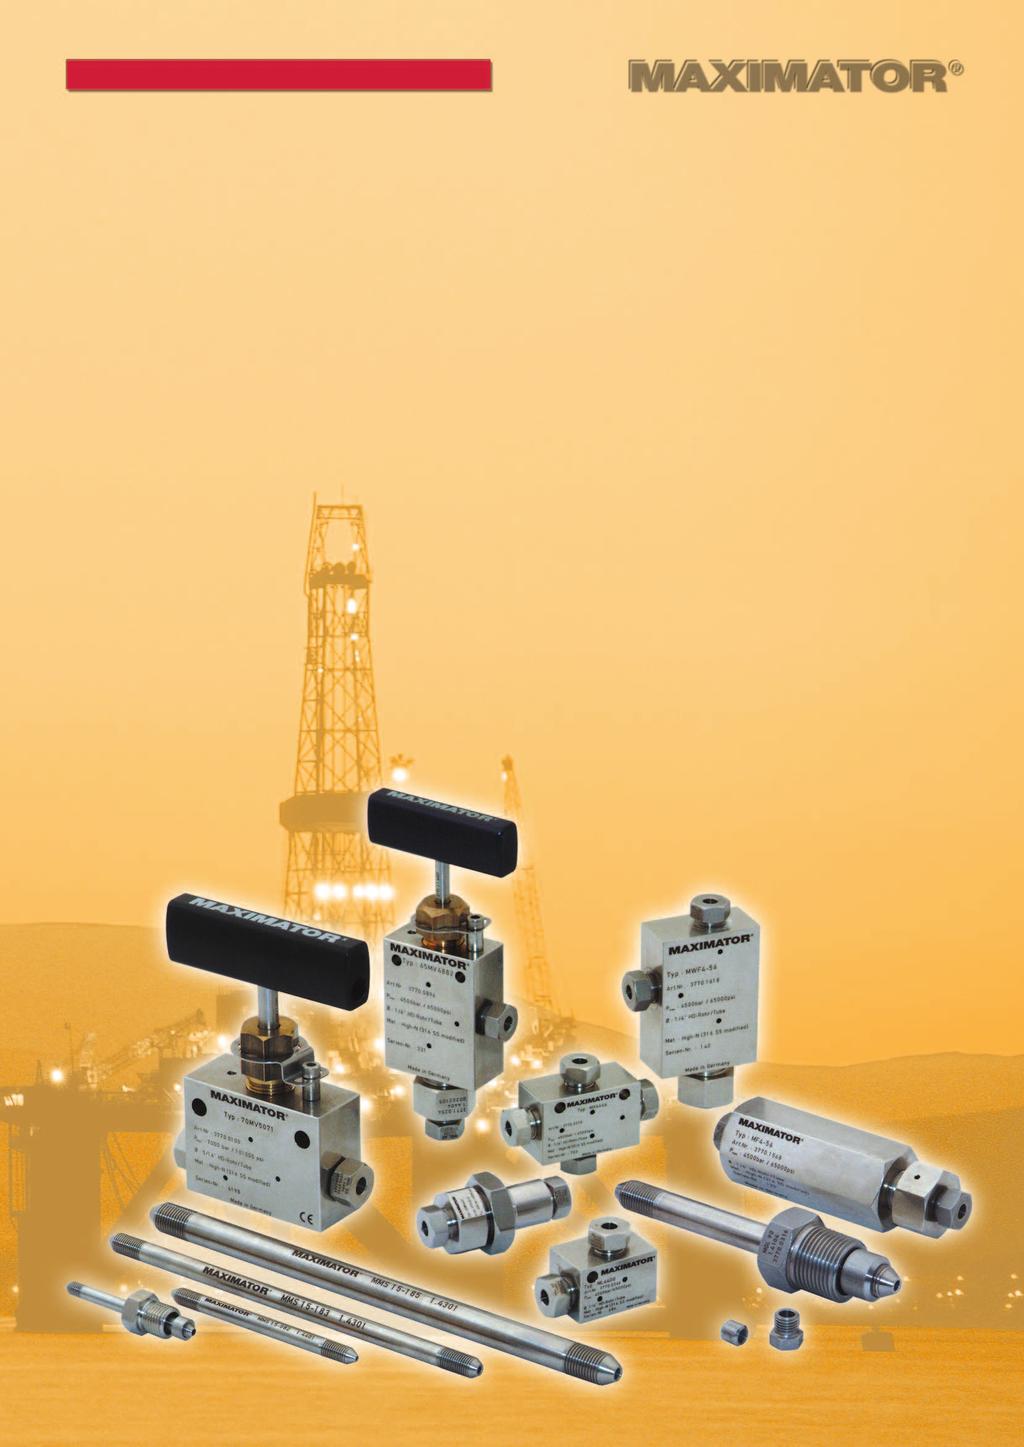 MAXIMATOR Valves, Fittings and Tubing MAXIMATOR manufactures an extended line of high pressure valves, fittings and tubing.